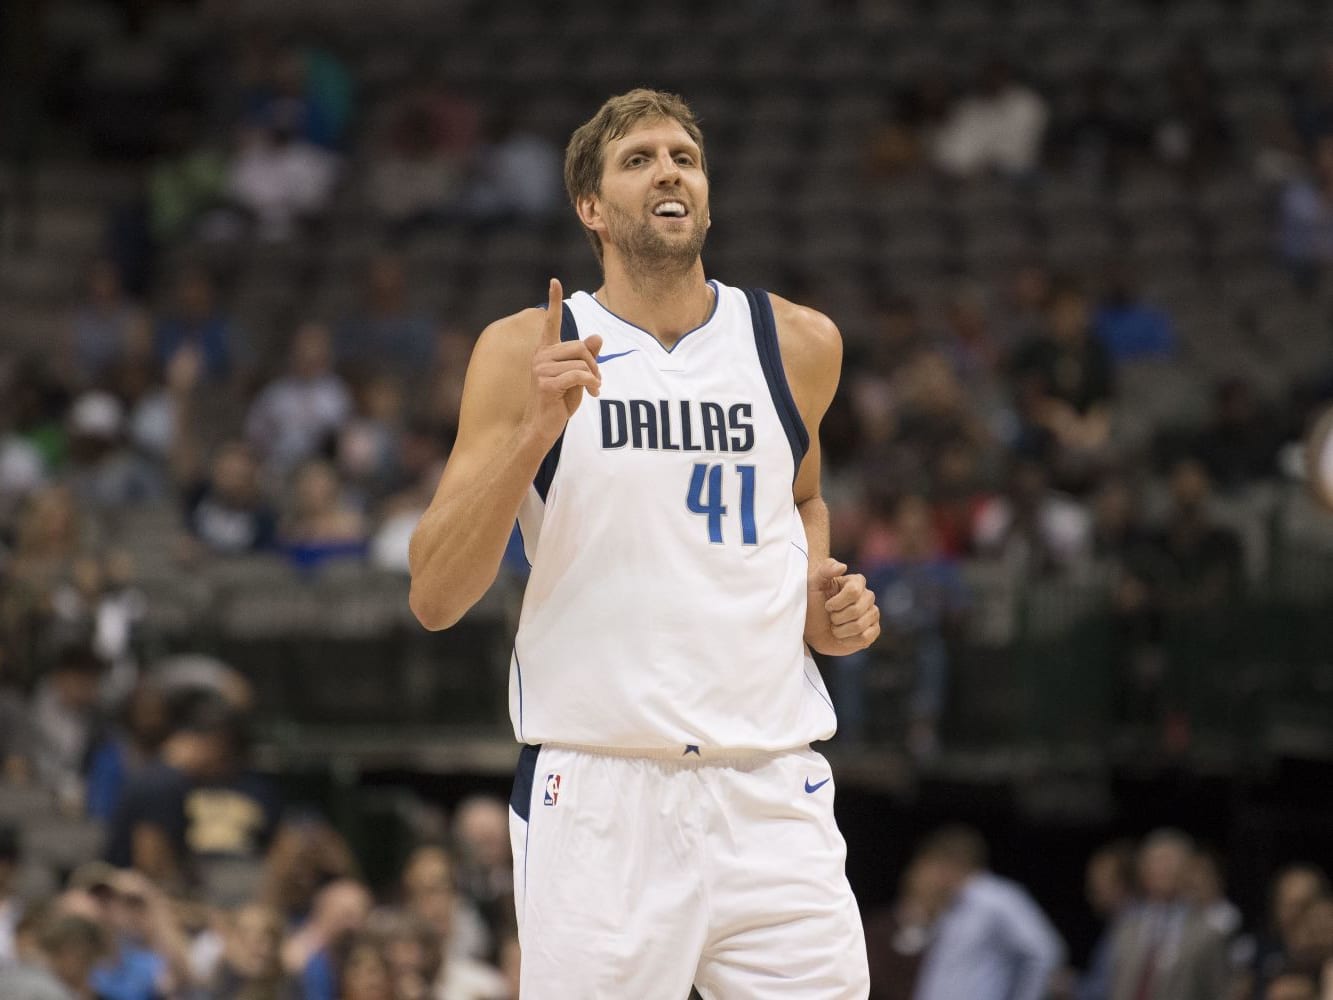 Dallas Mavericks: A look at the most talented Mavs team in the last 20 years